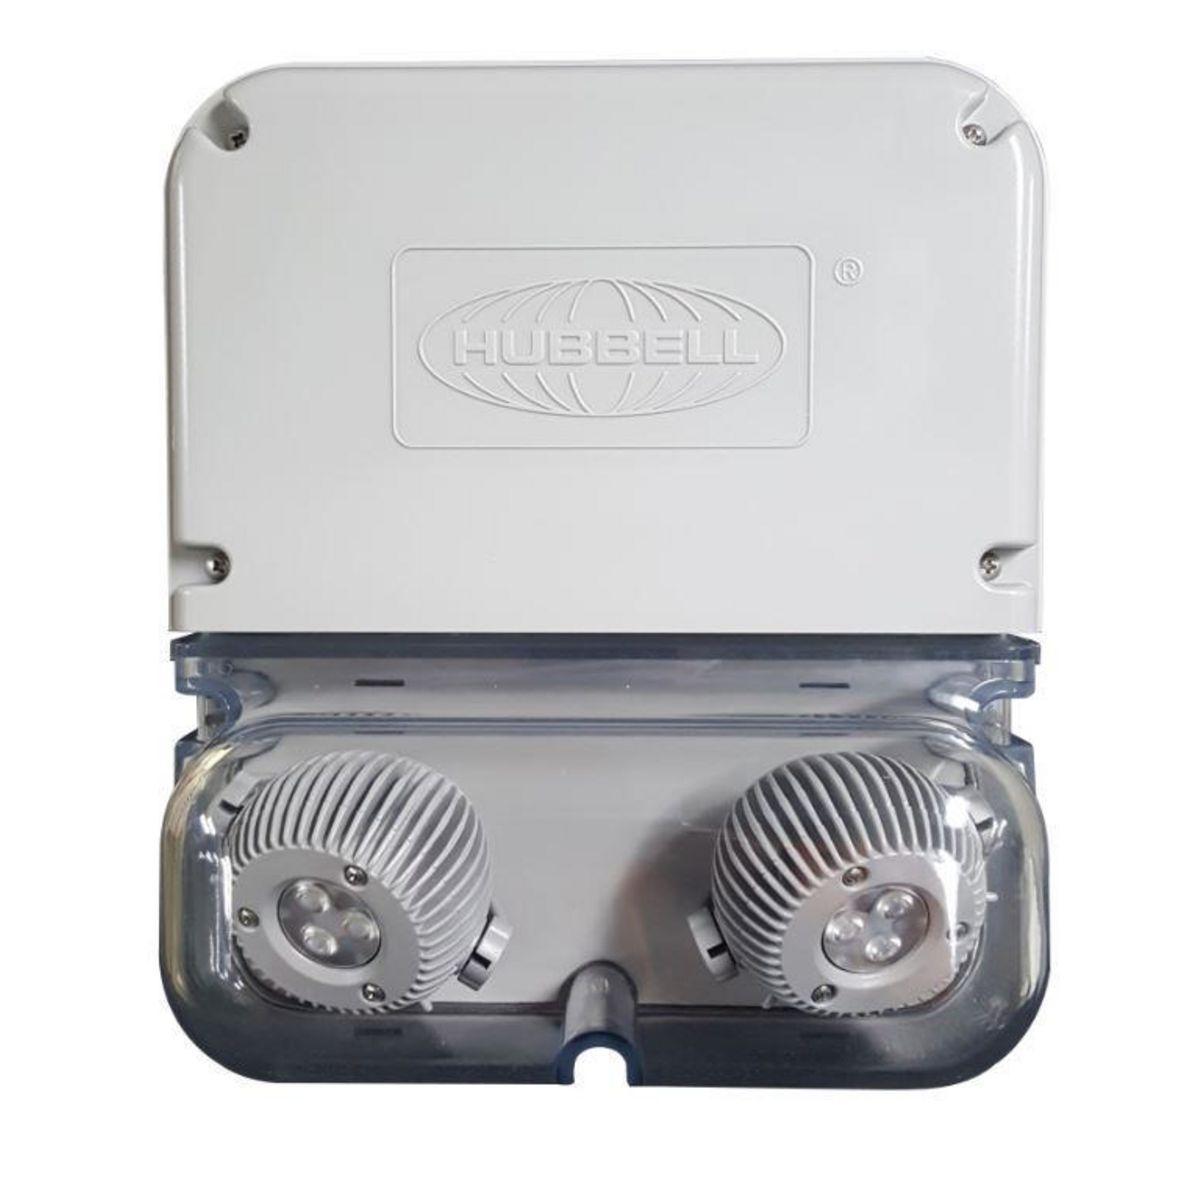 Hubbell NEBS12I-C2D1 NEBS Series 12 Watt Capacity Class 2 Division 1 Rated Emergency Light Unit With 3 Watt Heads & Spectron Self Diagnostics, Remote Capable  ; Provides the same level of lumen output with no light degradation for the full 90 minutes of battery discharge. ; F